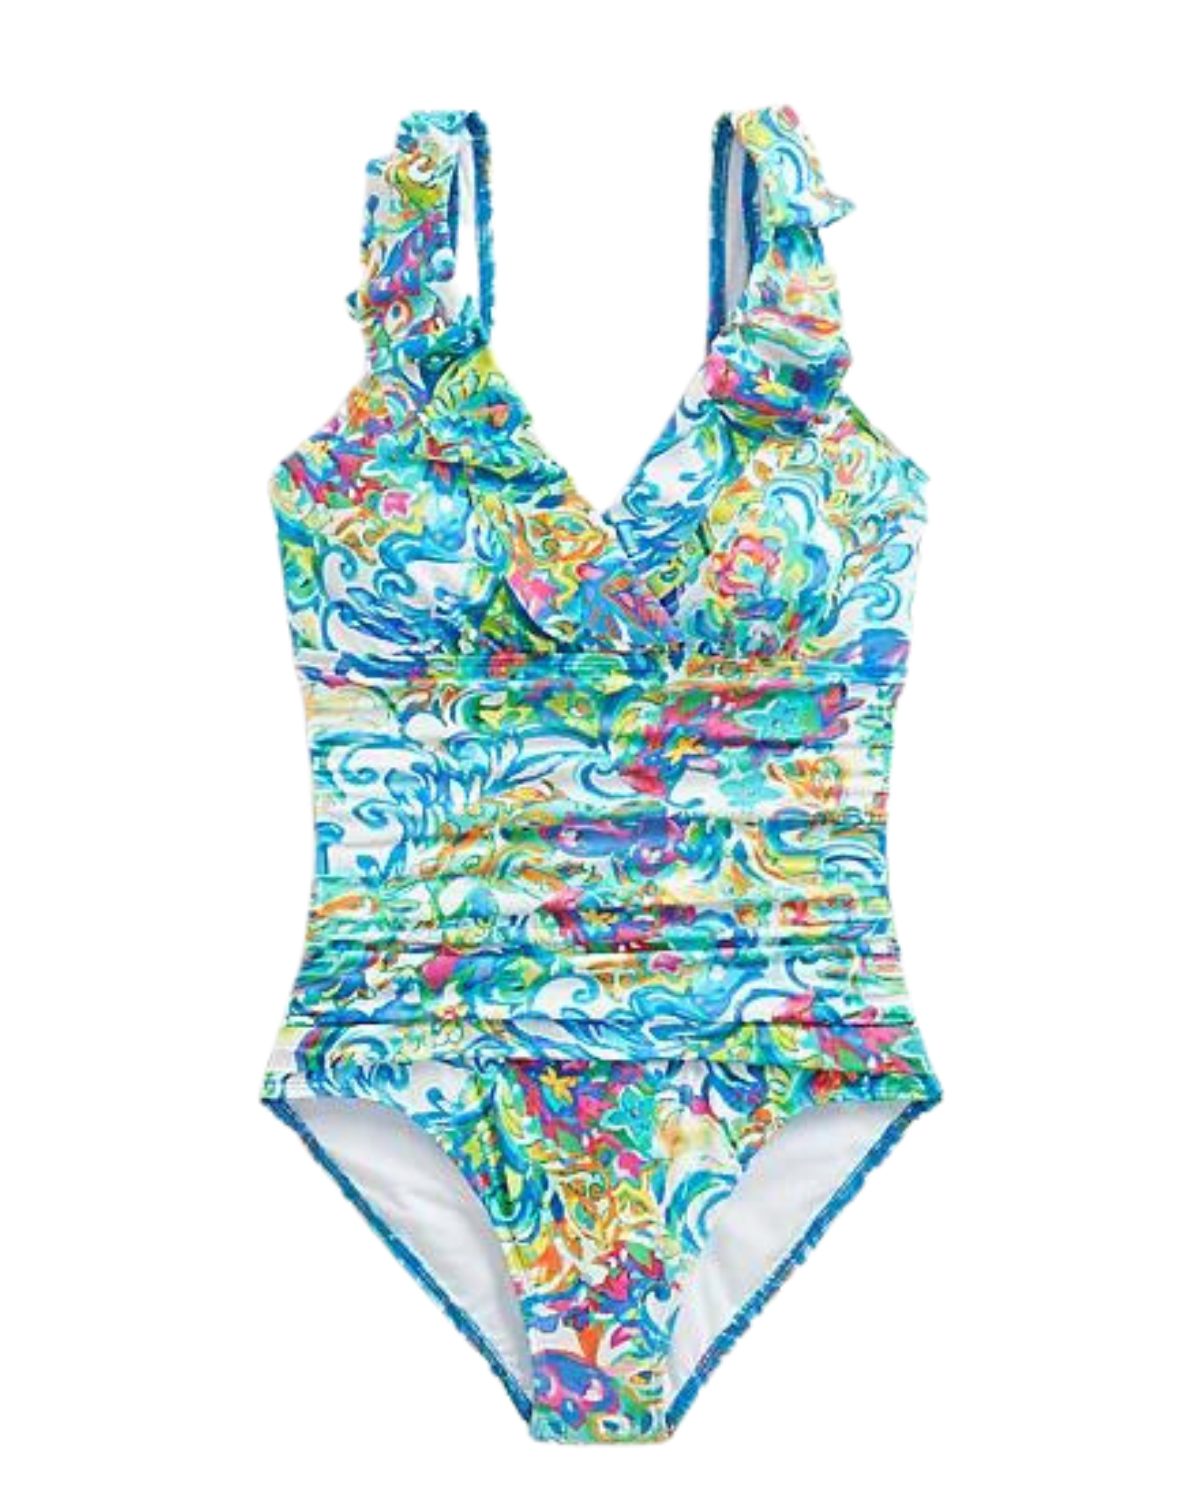 Model wearing a one piece swimsuit with a v-neck ruffle trim and shirred torso in a paisley blue, white, green and yellow multi colored print